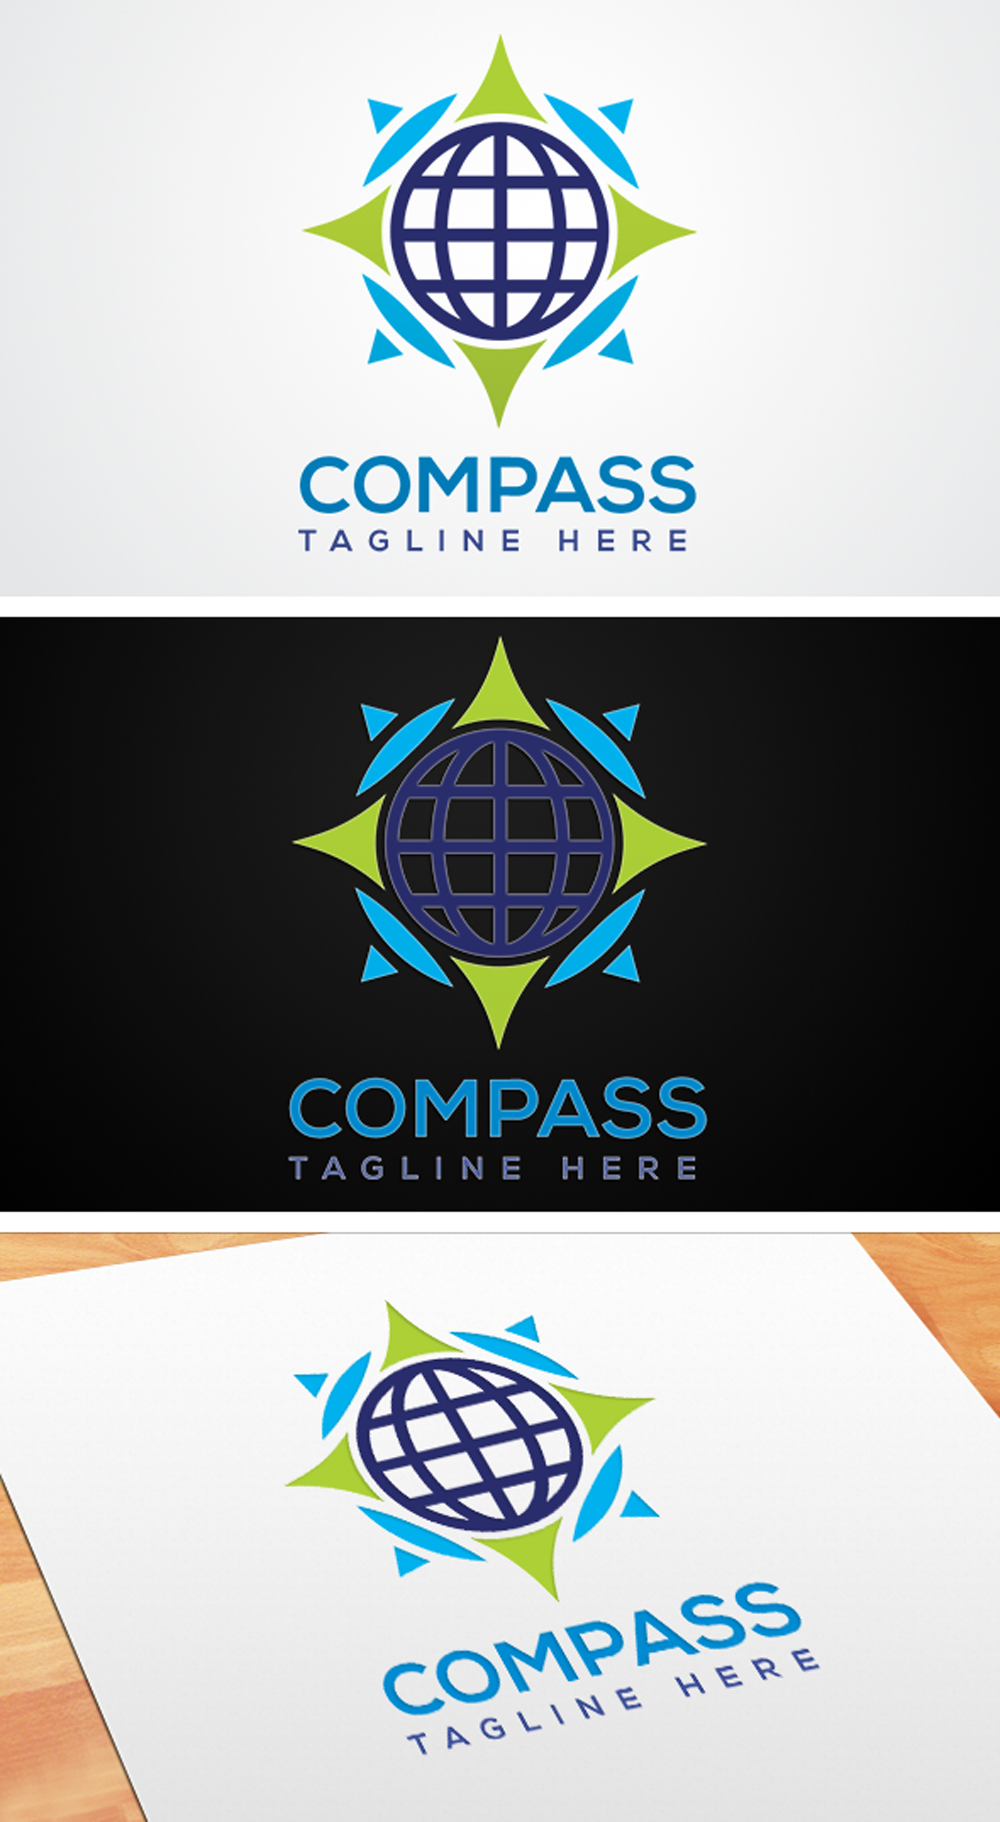 A set of images of amazing round logos in the form of a compass.